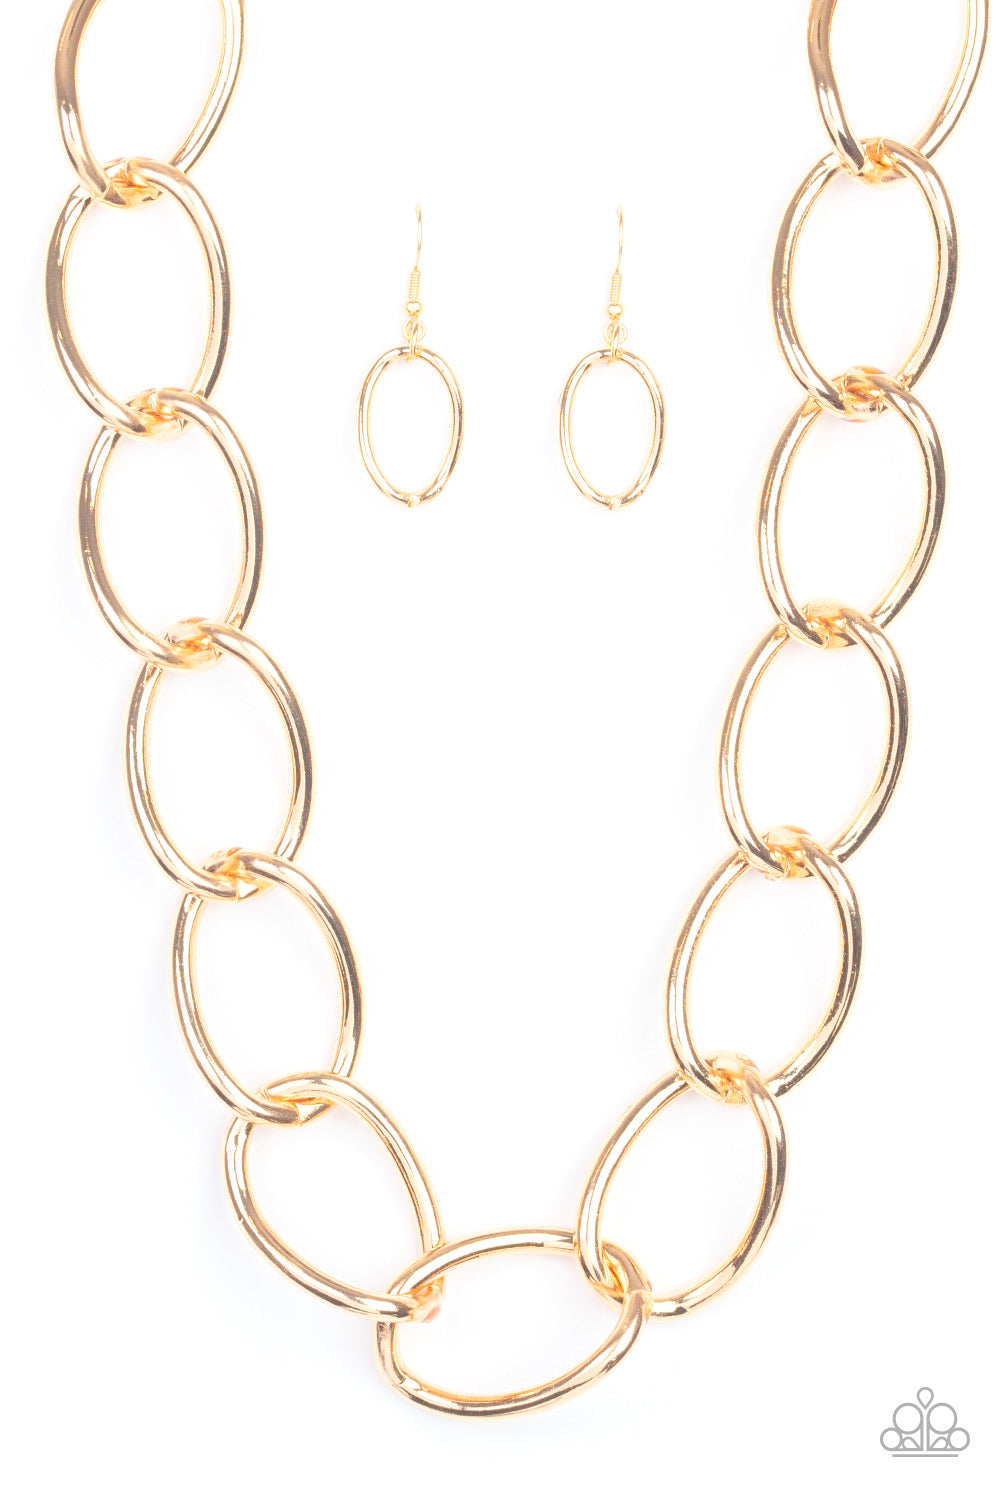 The Challenger Gold-Necklace